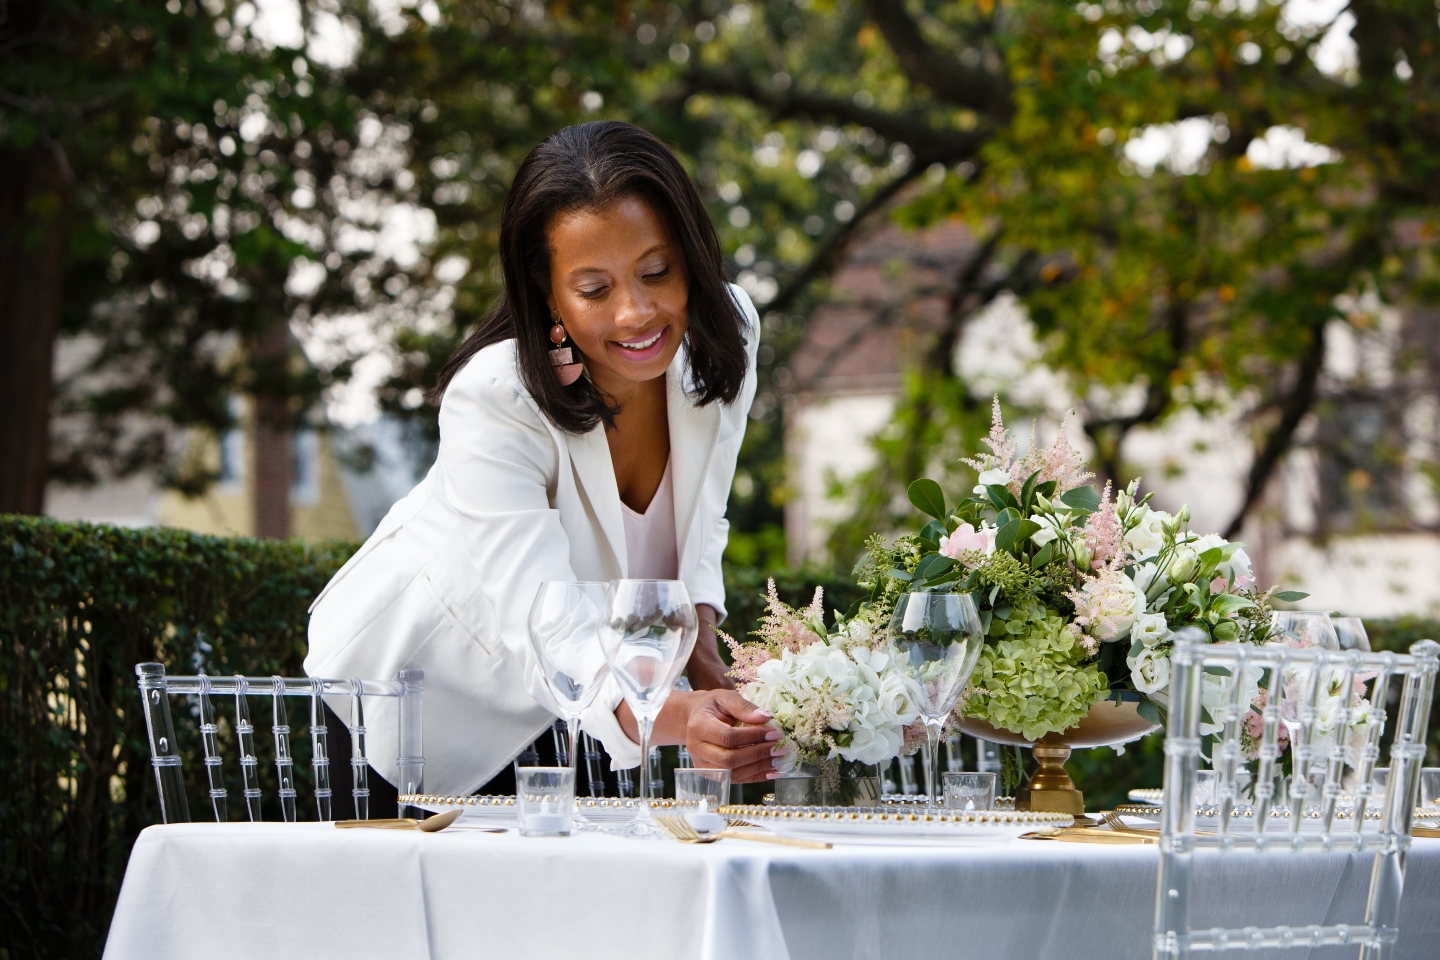 How to find a wedding planner